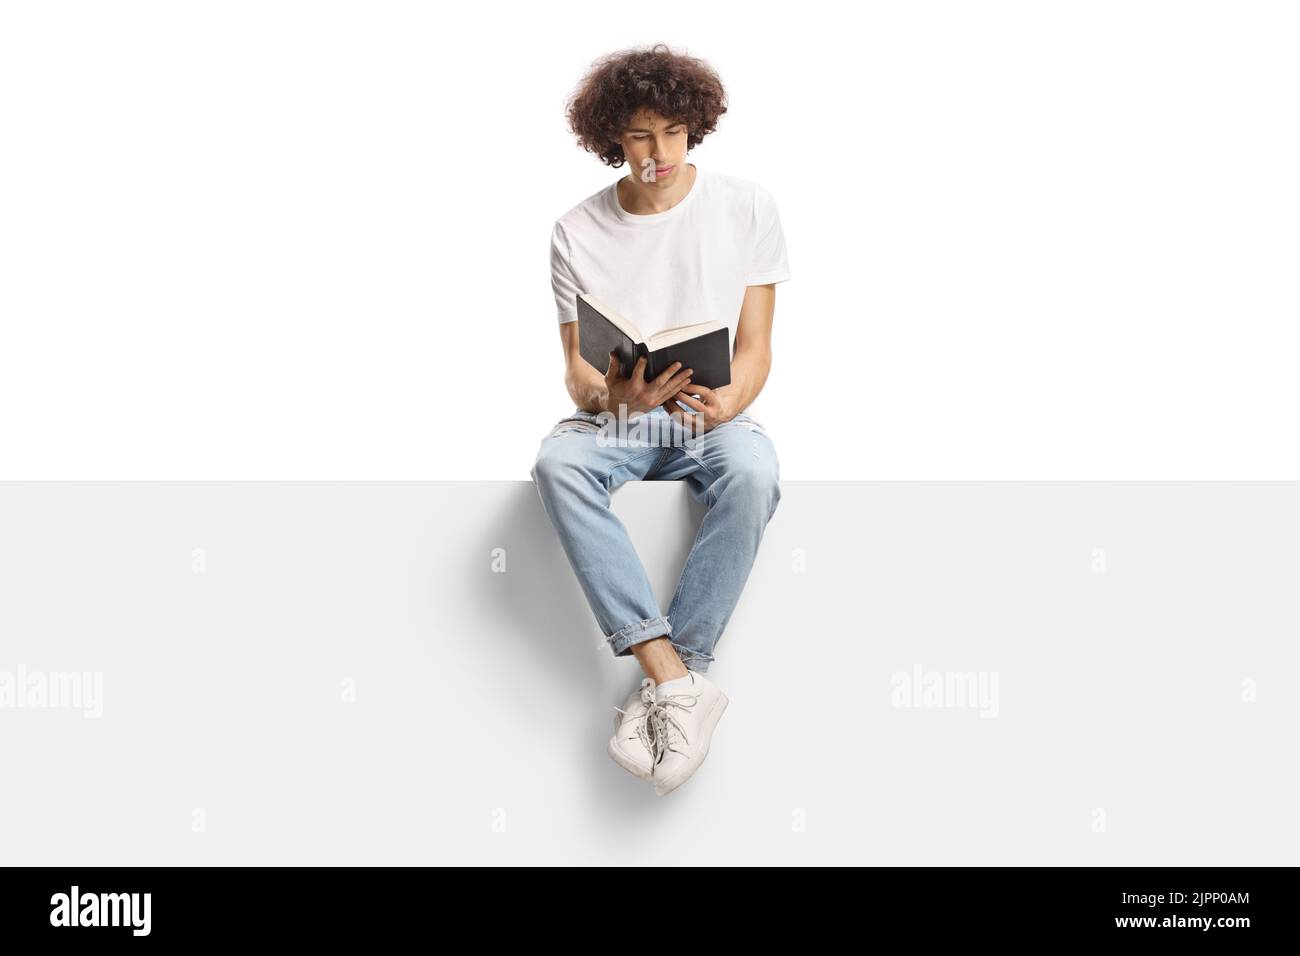 Young man with curly hair sitting on a panel and reading a book isolated on white background Stock Photo